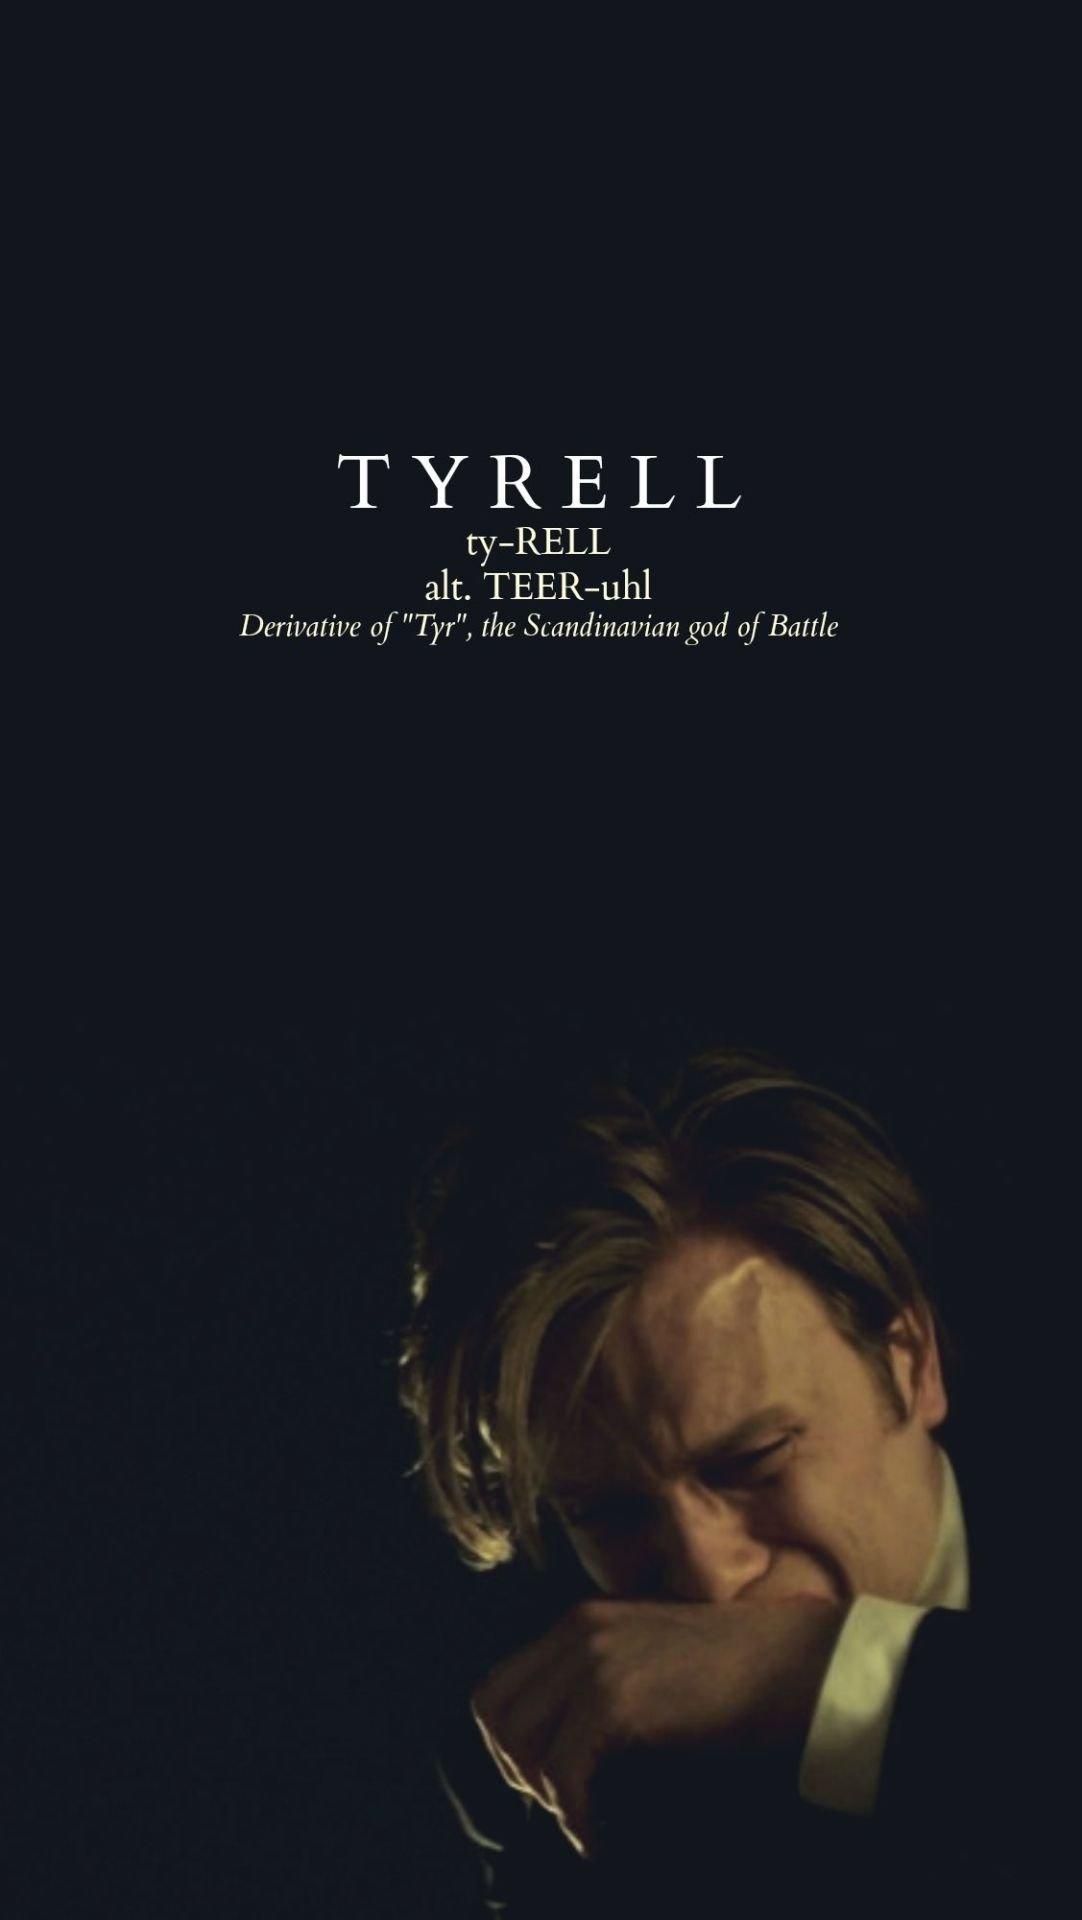 I made a mobile wallpaper of Tyrell